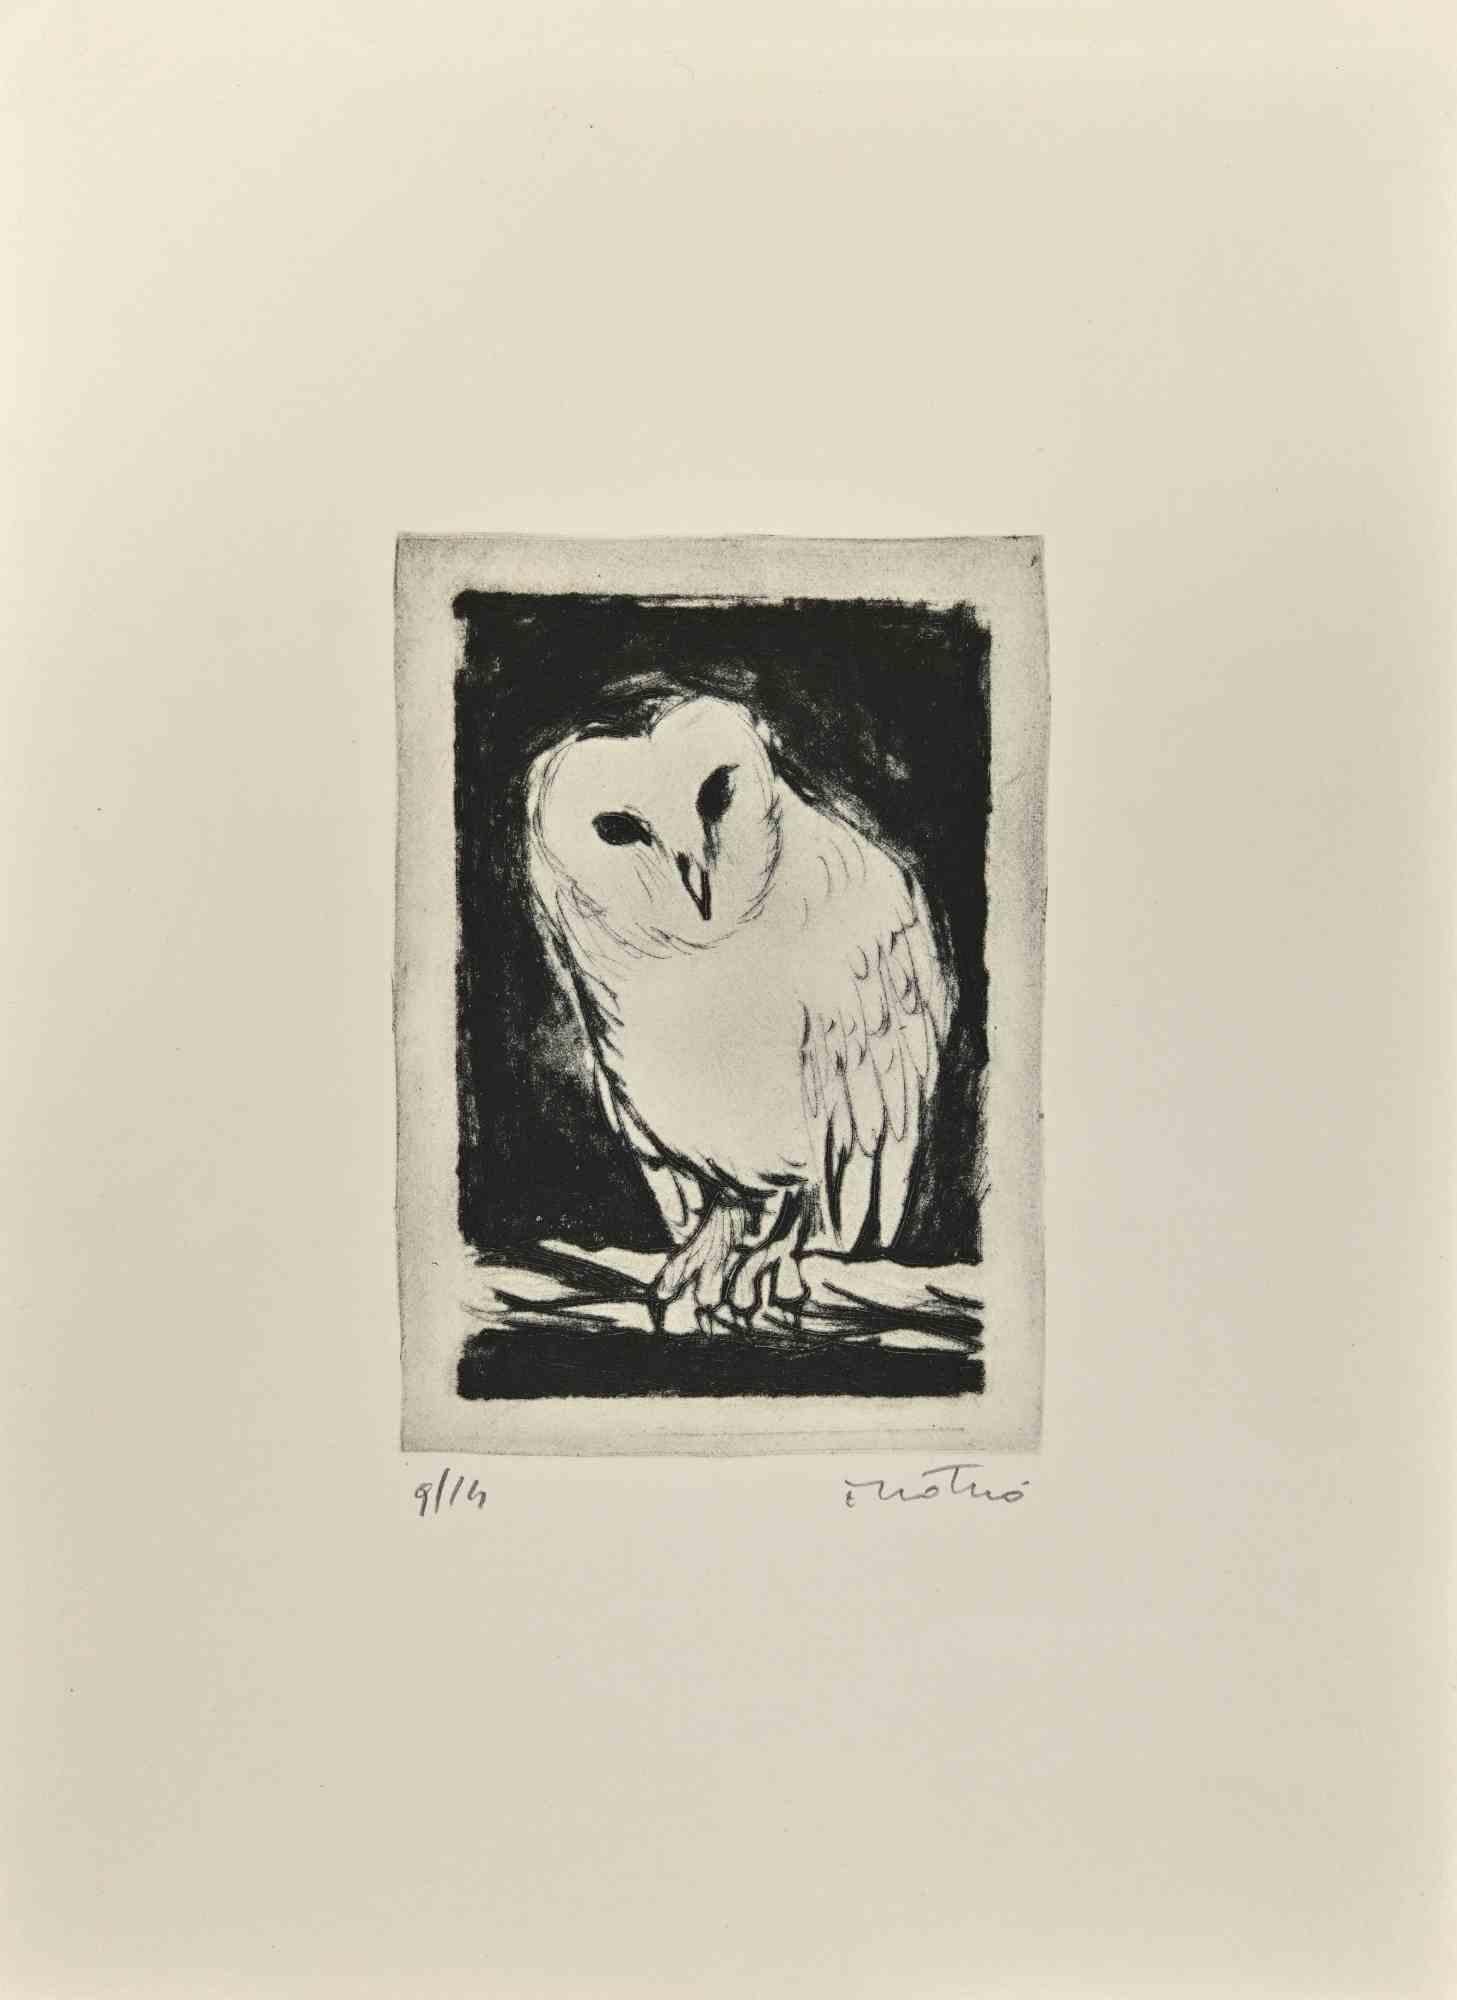 Owl is an Etching realized by Enotrio Pugliese in 1963.

Limited edition of 14 copies numbered and signed by the artist.

Good condition on a white cardboard.

Enotrio Pugliese (May 11, 1920 - August 1989) was an Italian painter. Born in Buenos